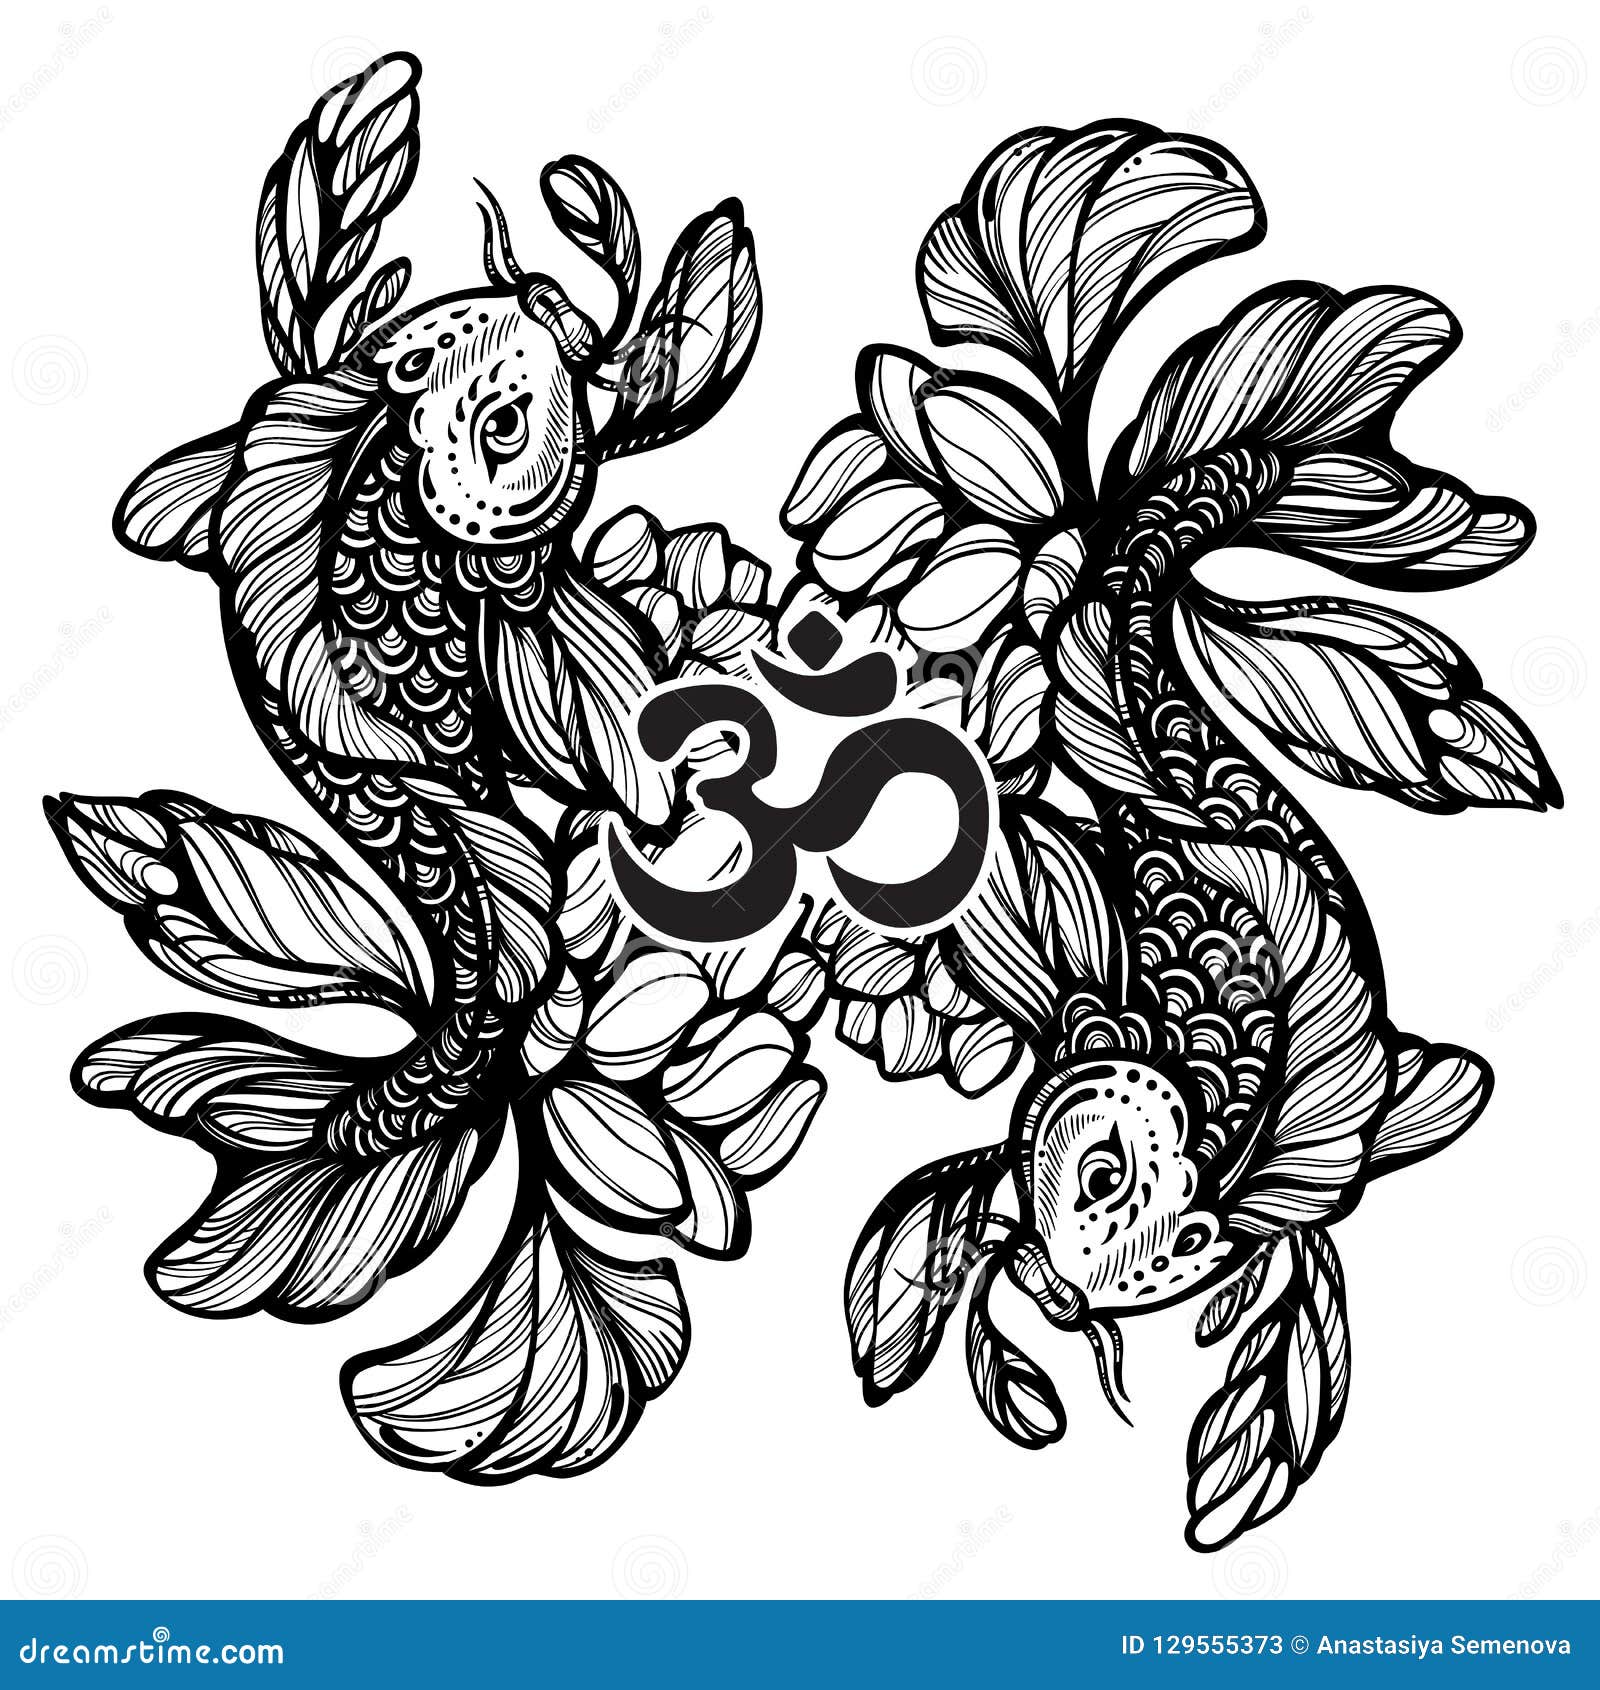 Premium Vector  Koi fish with lotus flower and finger wave in japanese  illustration style